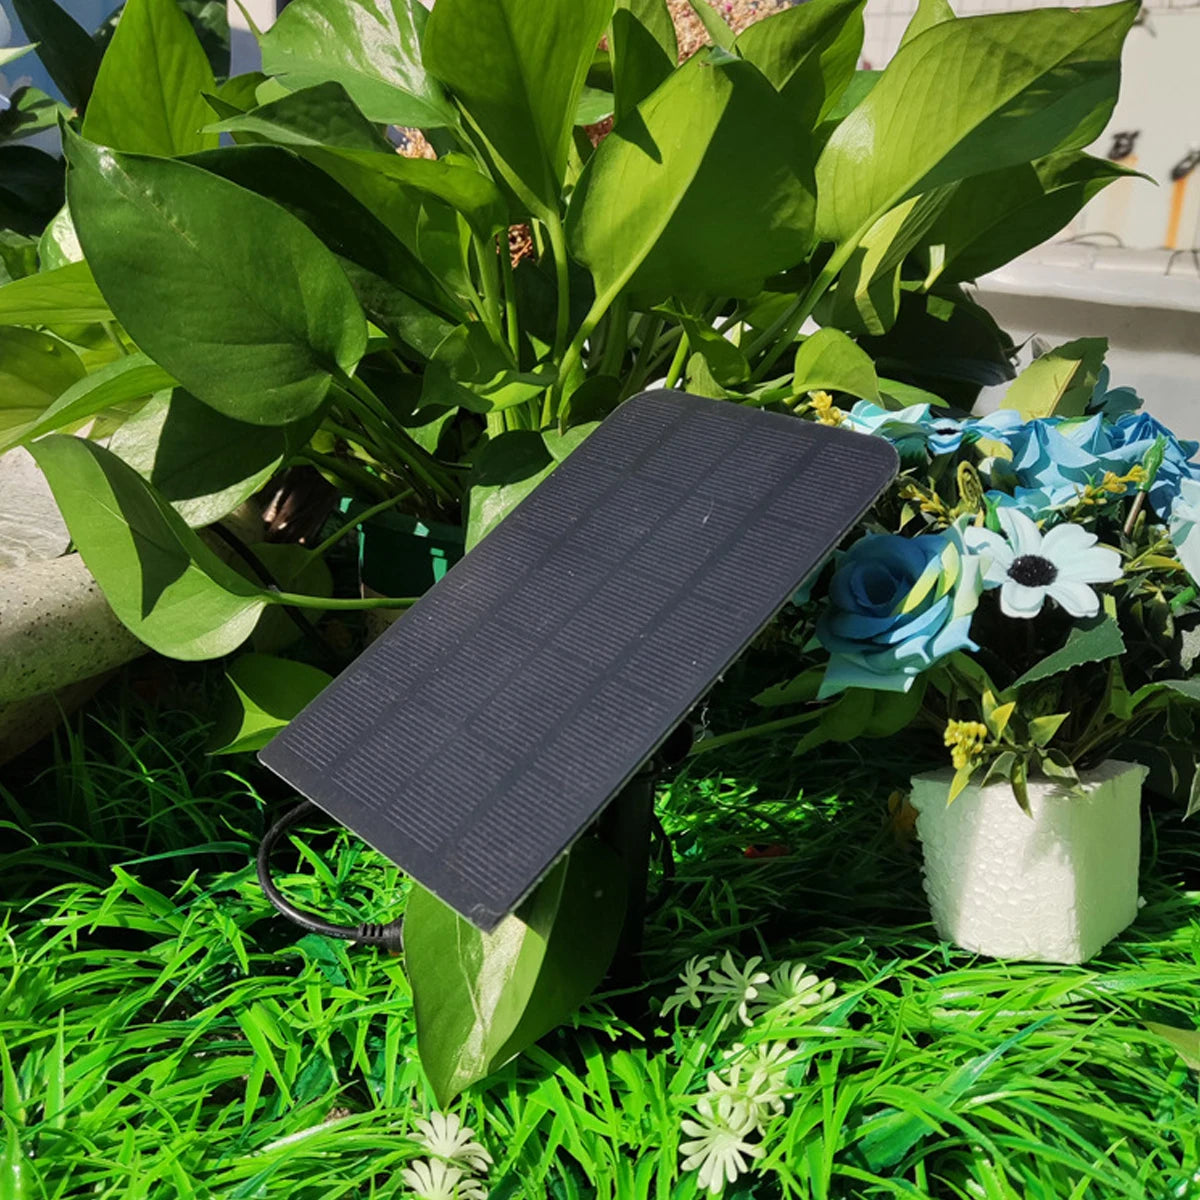 2.5W Solar Fountain, Use with water only; this product may be damaged if used dry.